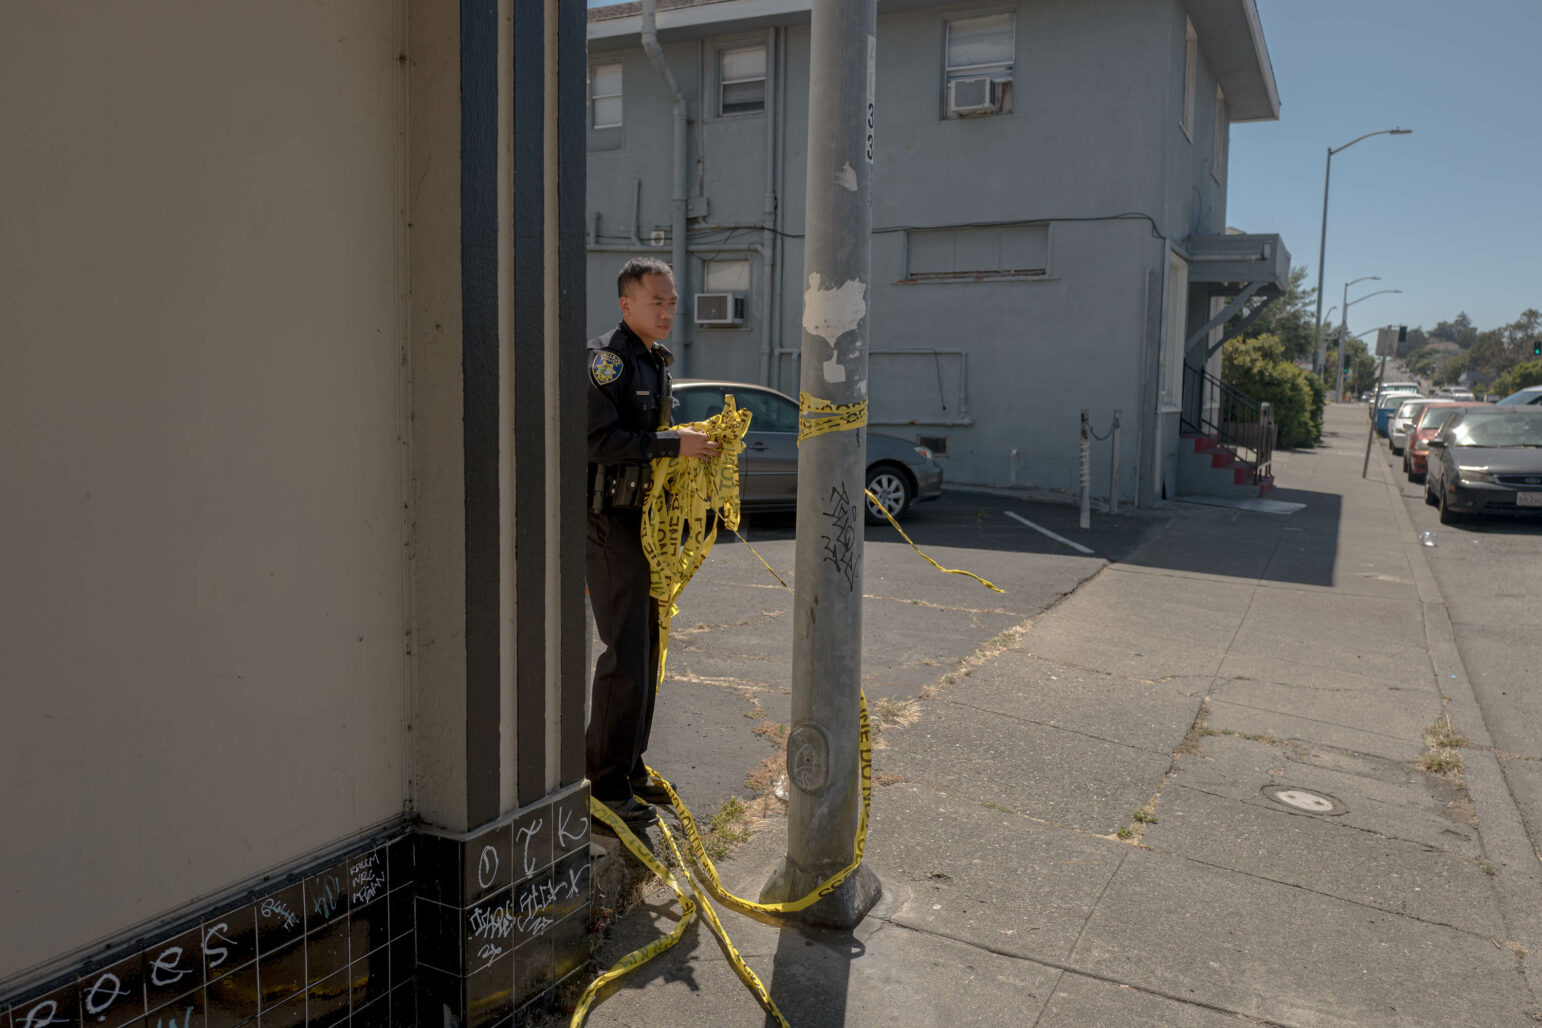 A Vallejo police officer breaks down a crime scene by removing police tape from a pole during daytime.